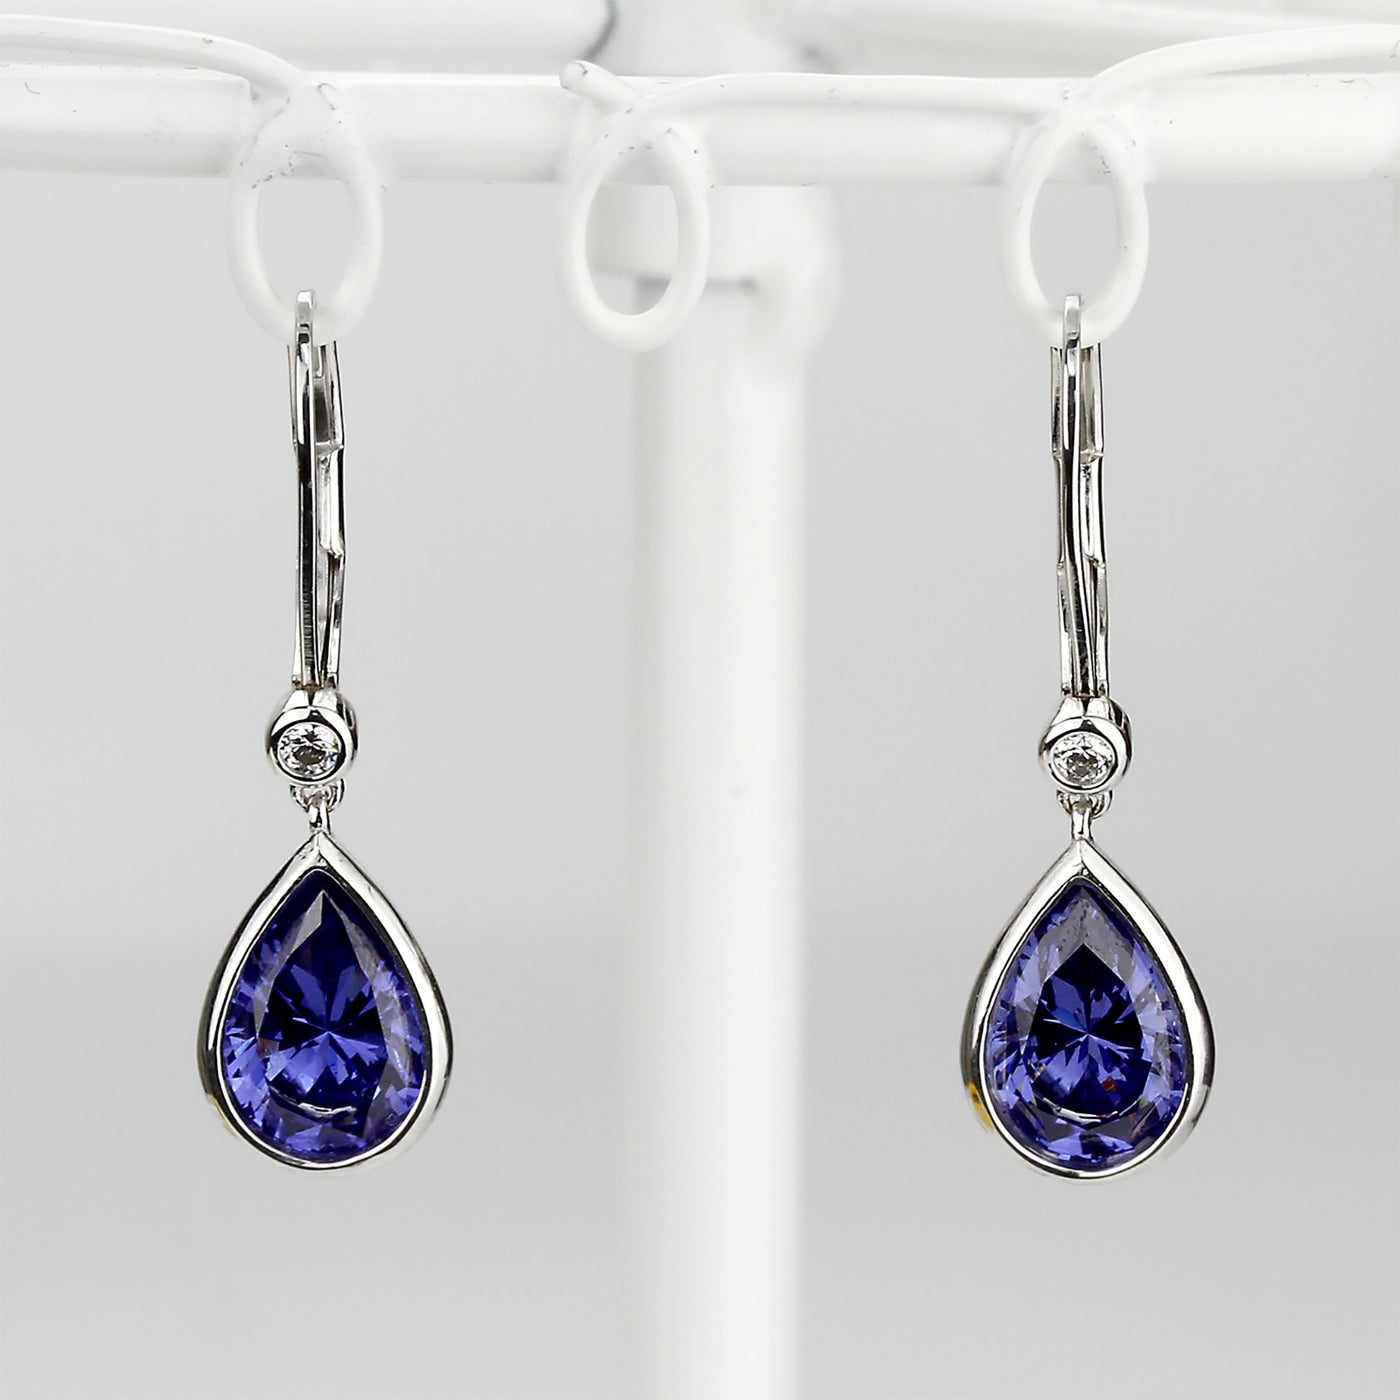 Teardrop 3.6 CTW Simulated Tanzanite Earrings, Platinum Plated Sterling Silver